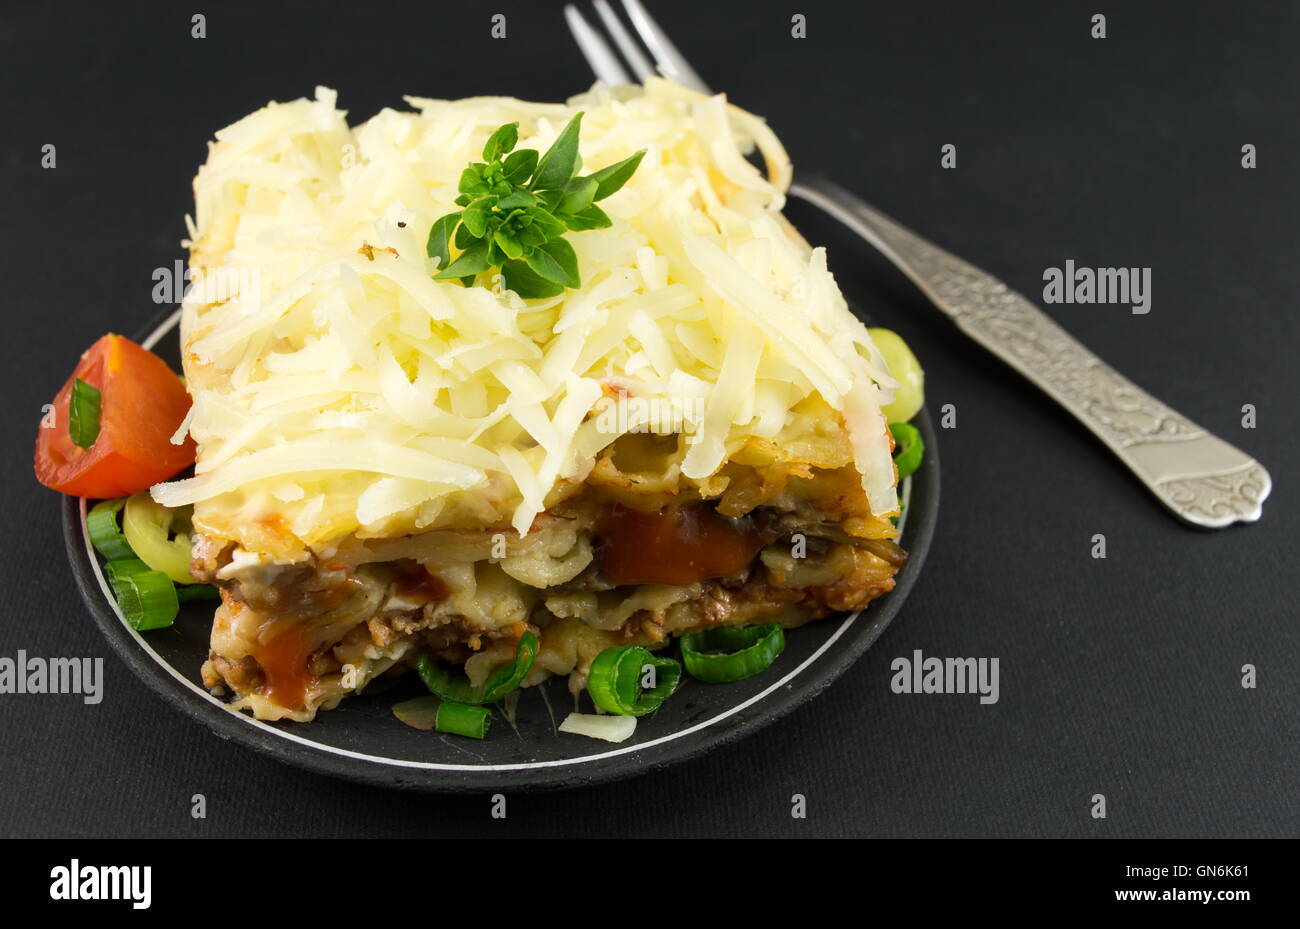 Portion of lasagna with vegetables on a dark table Stock Photo